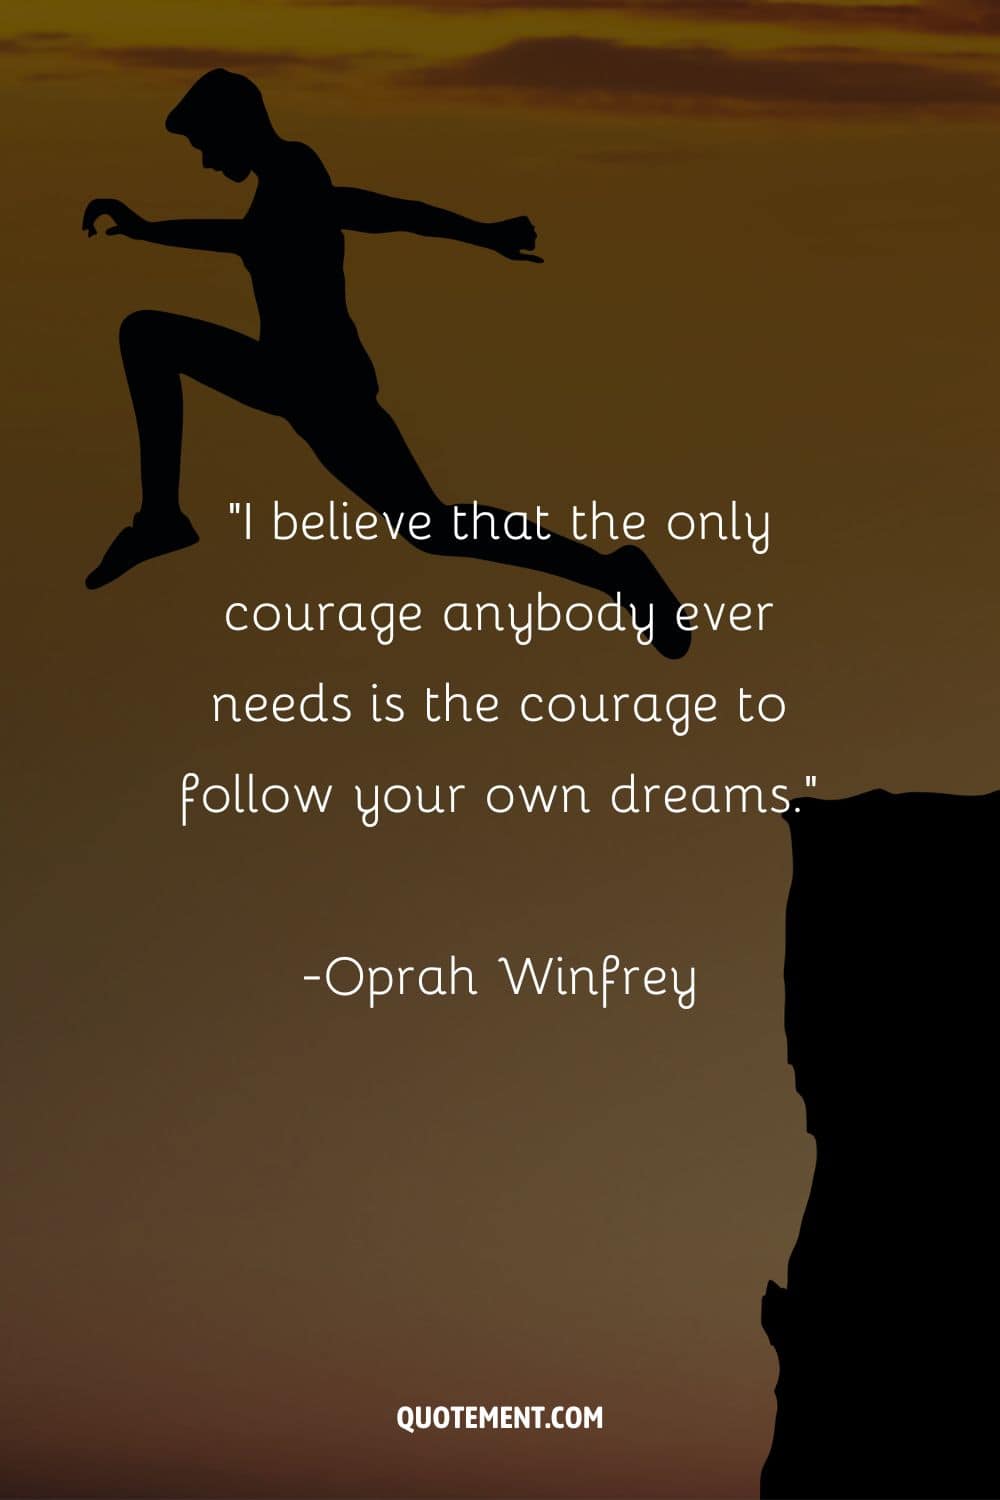 darkened figure diving from a cliff representing the best quote about courage
